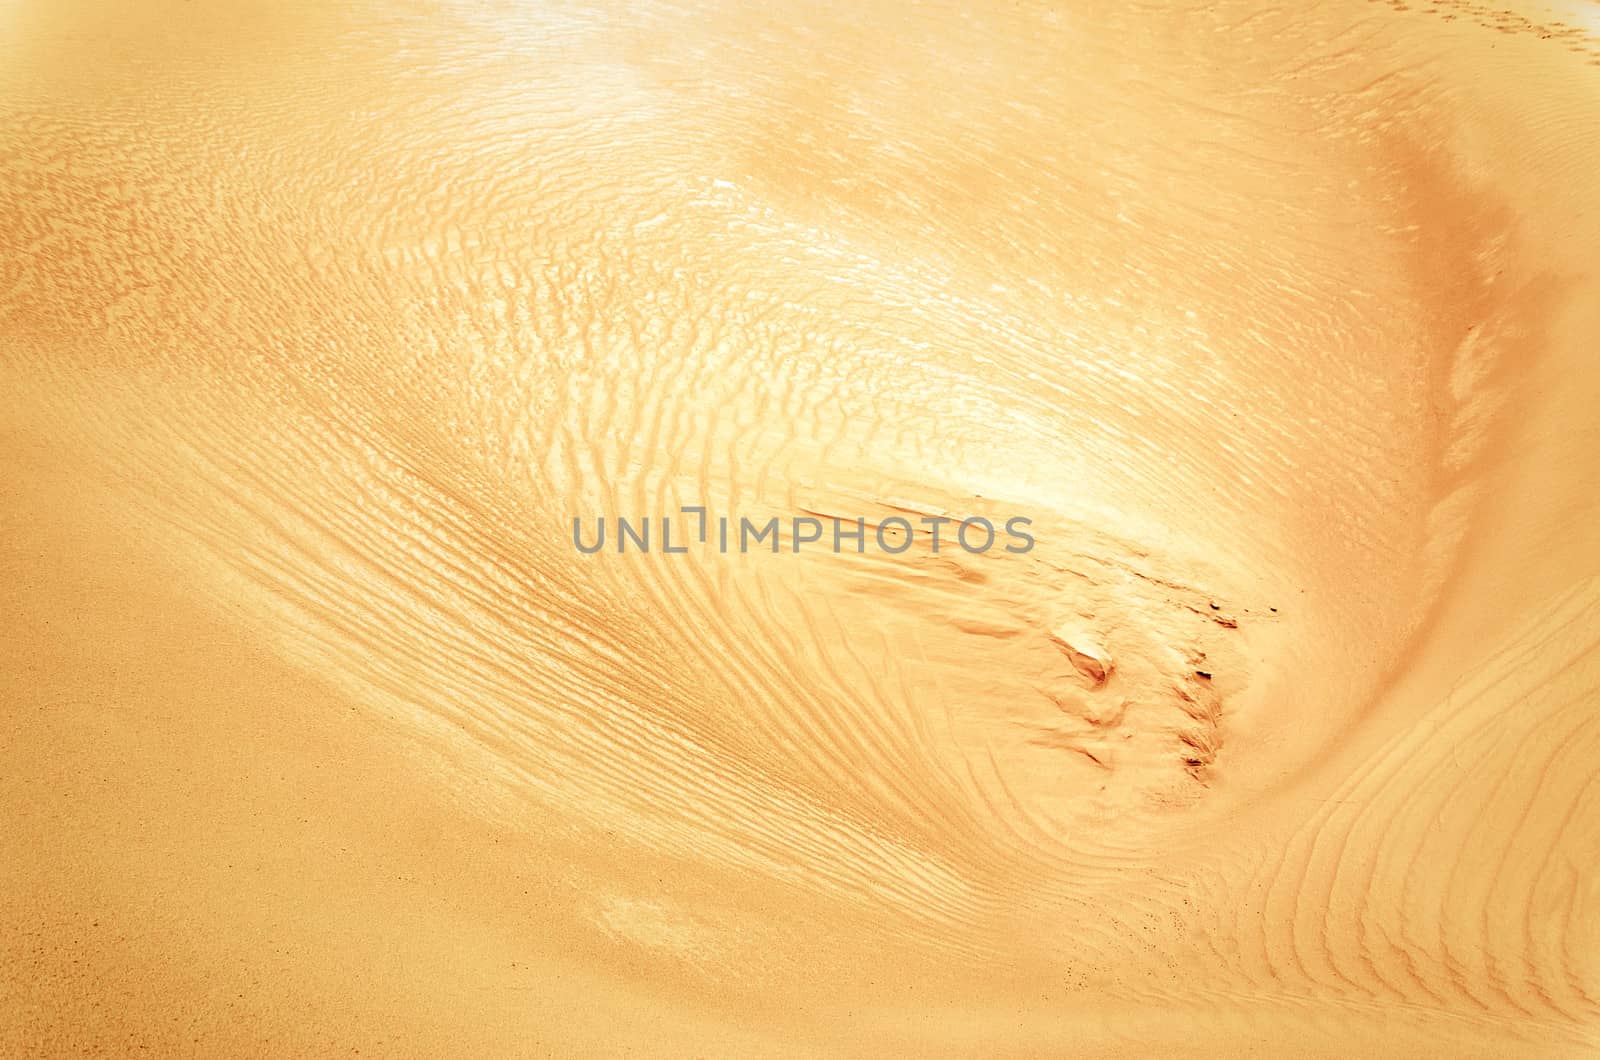 Patterns in a sand dune in Macuira National Park in Colombia